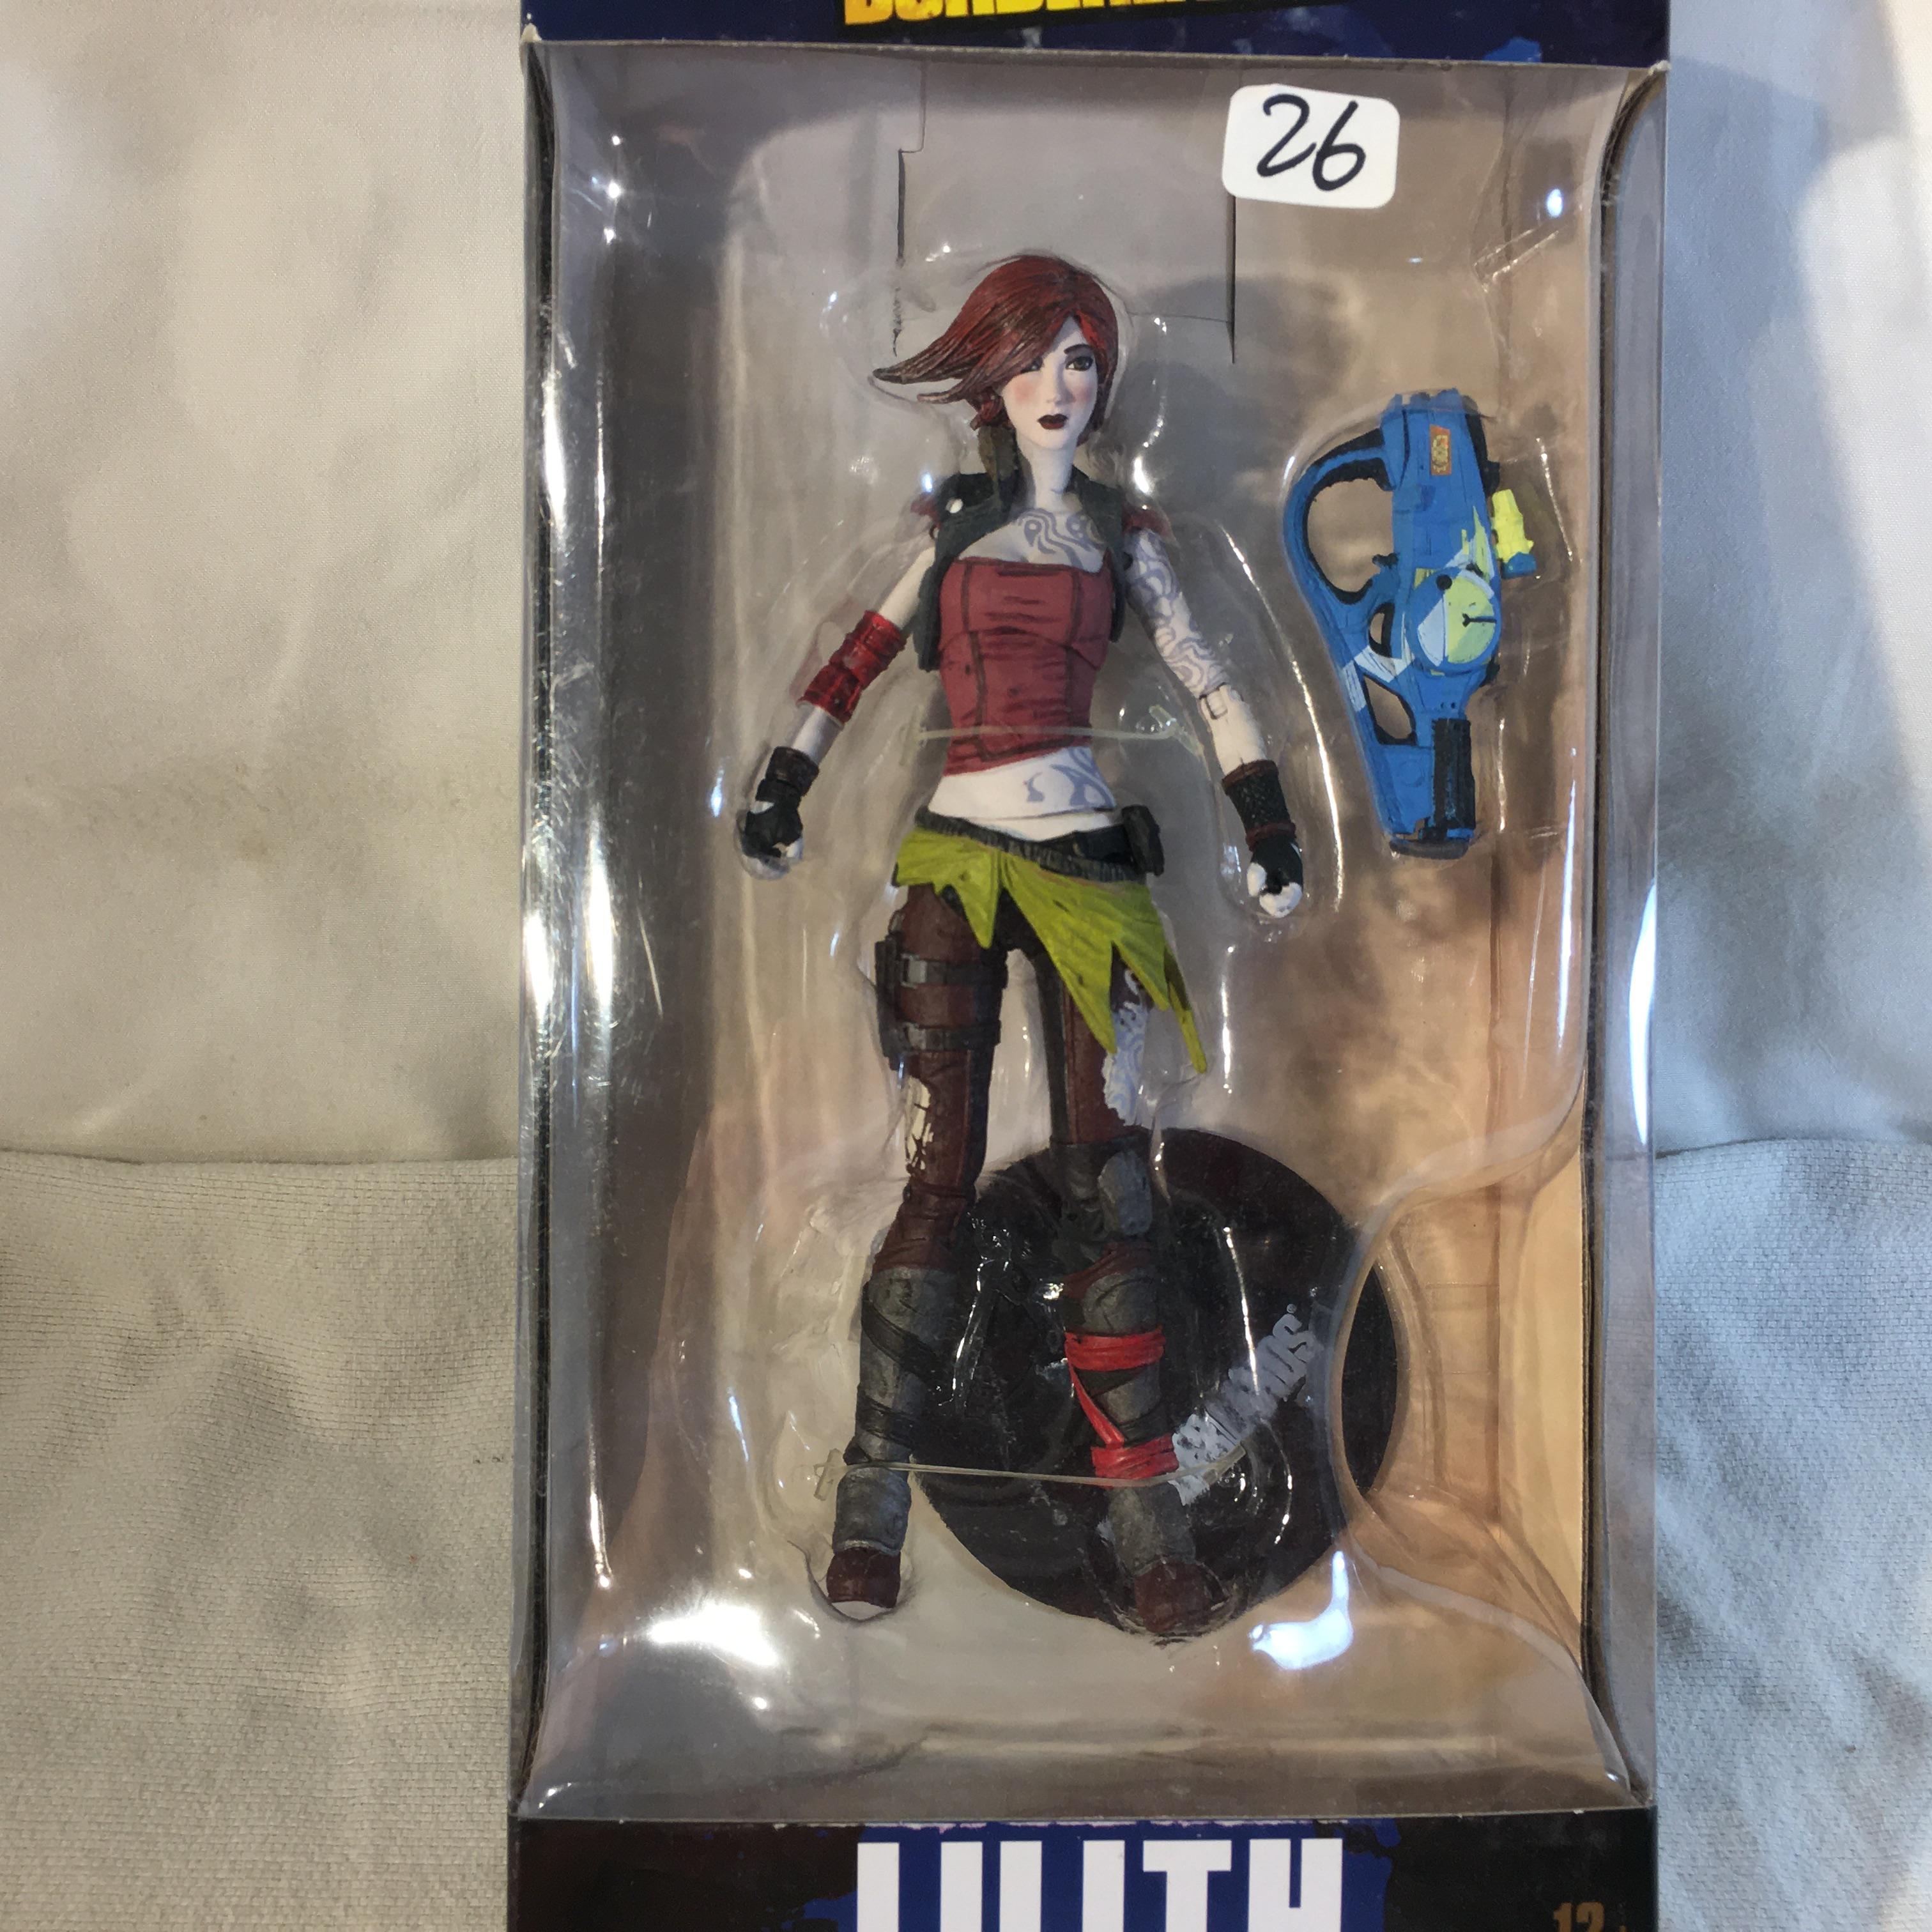 NIB Collector Gearbox Borderlands Lilith 8"Tall Figure